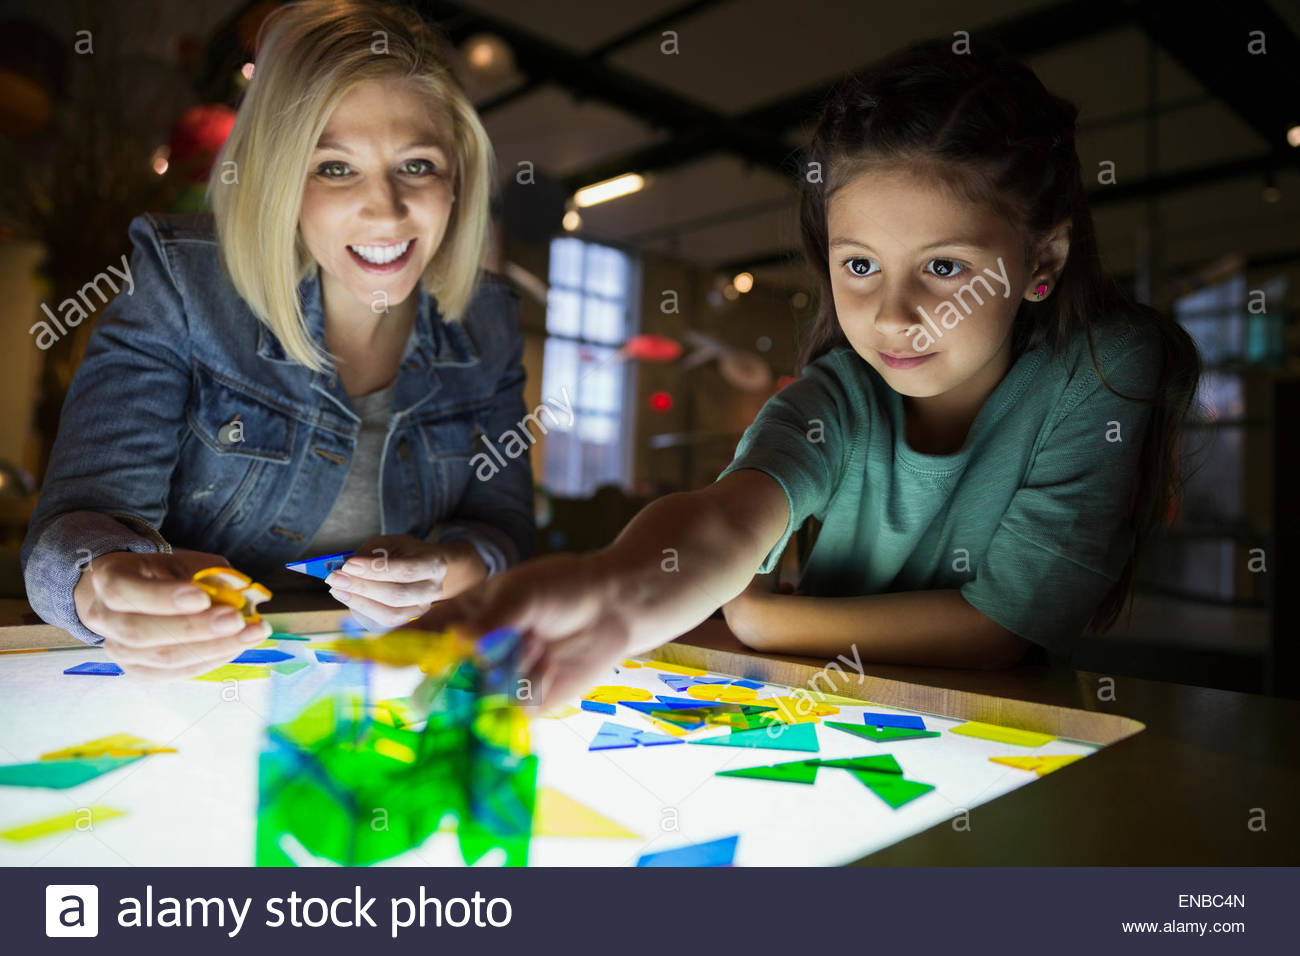 Mother daughter assembling geometric shapes at science center Stock Photo